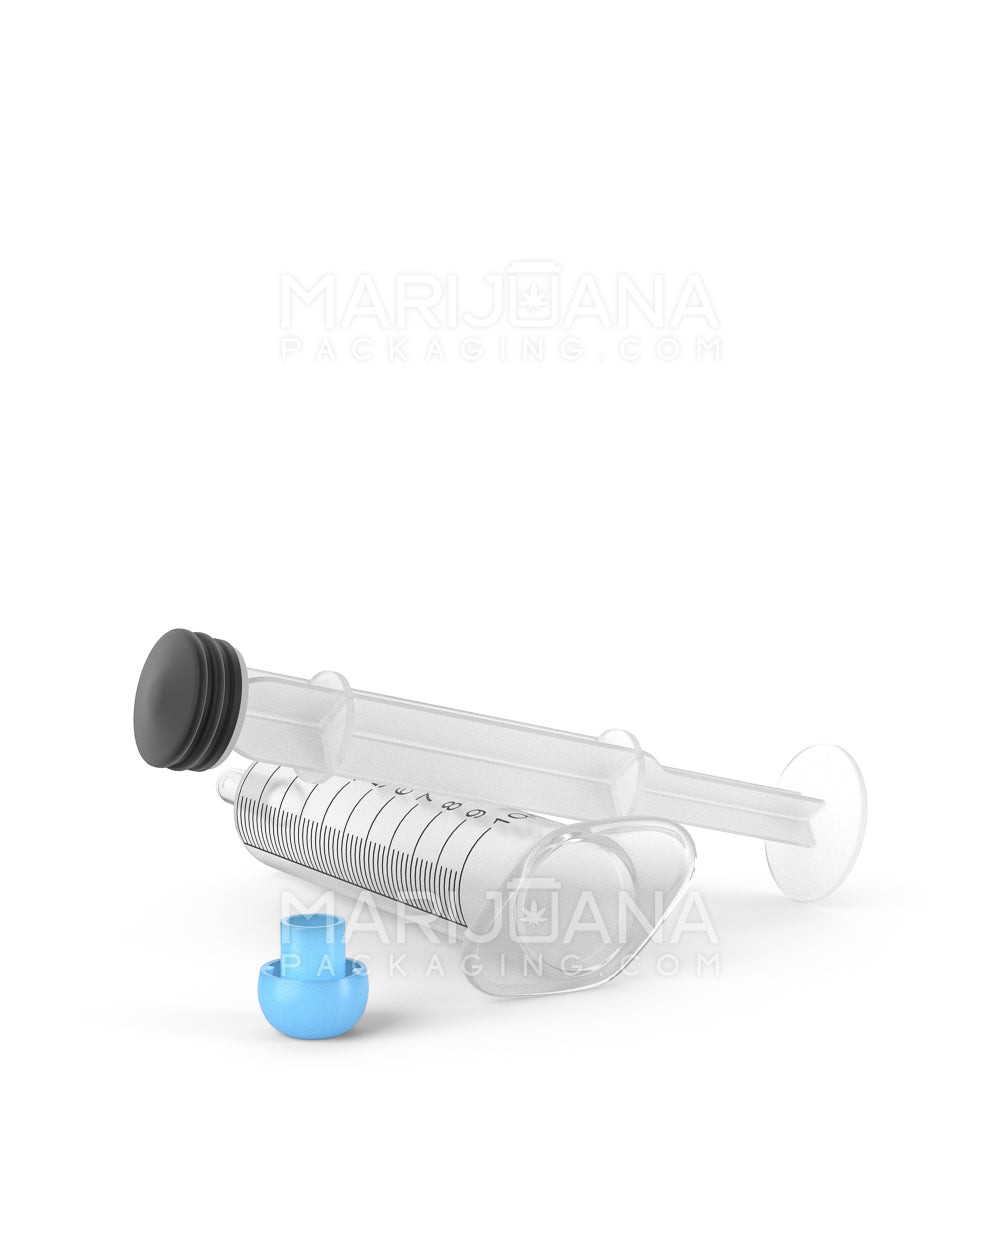 Plastic Oral Concentrate Syringes | 10mL - 1mL Increments | Sample - 5